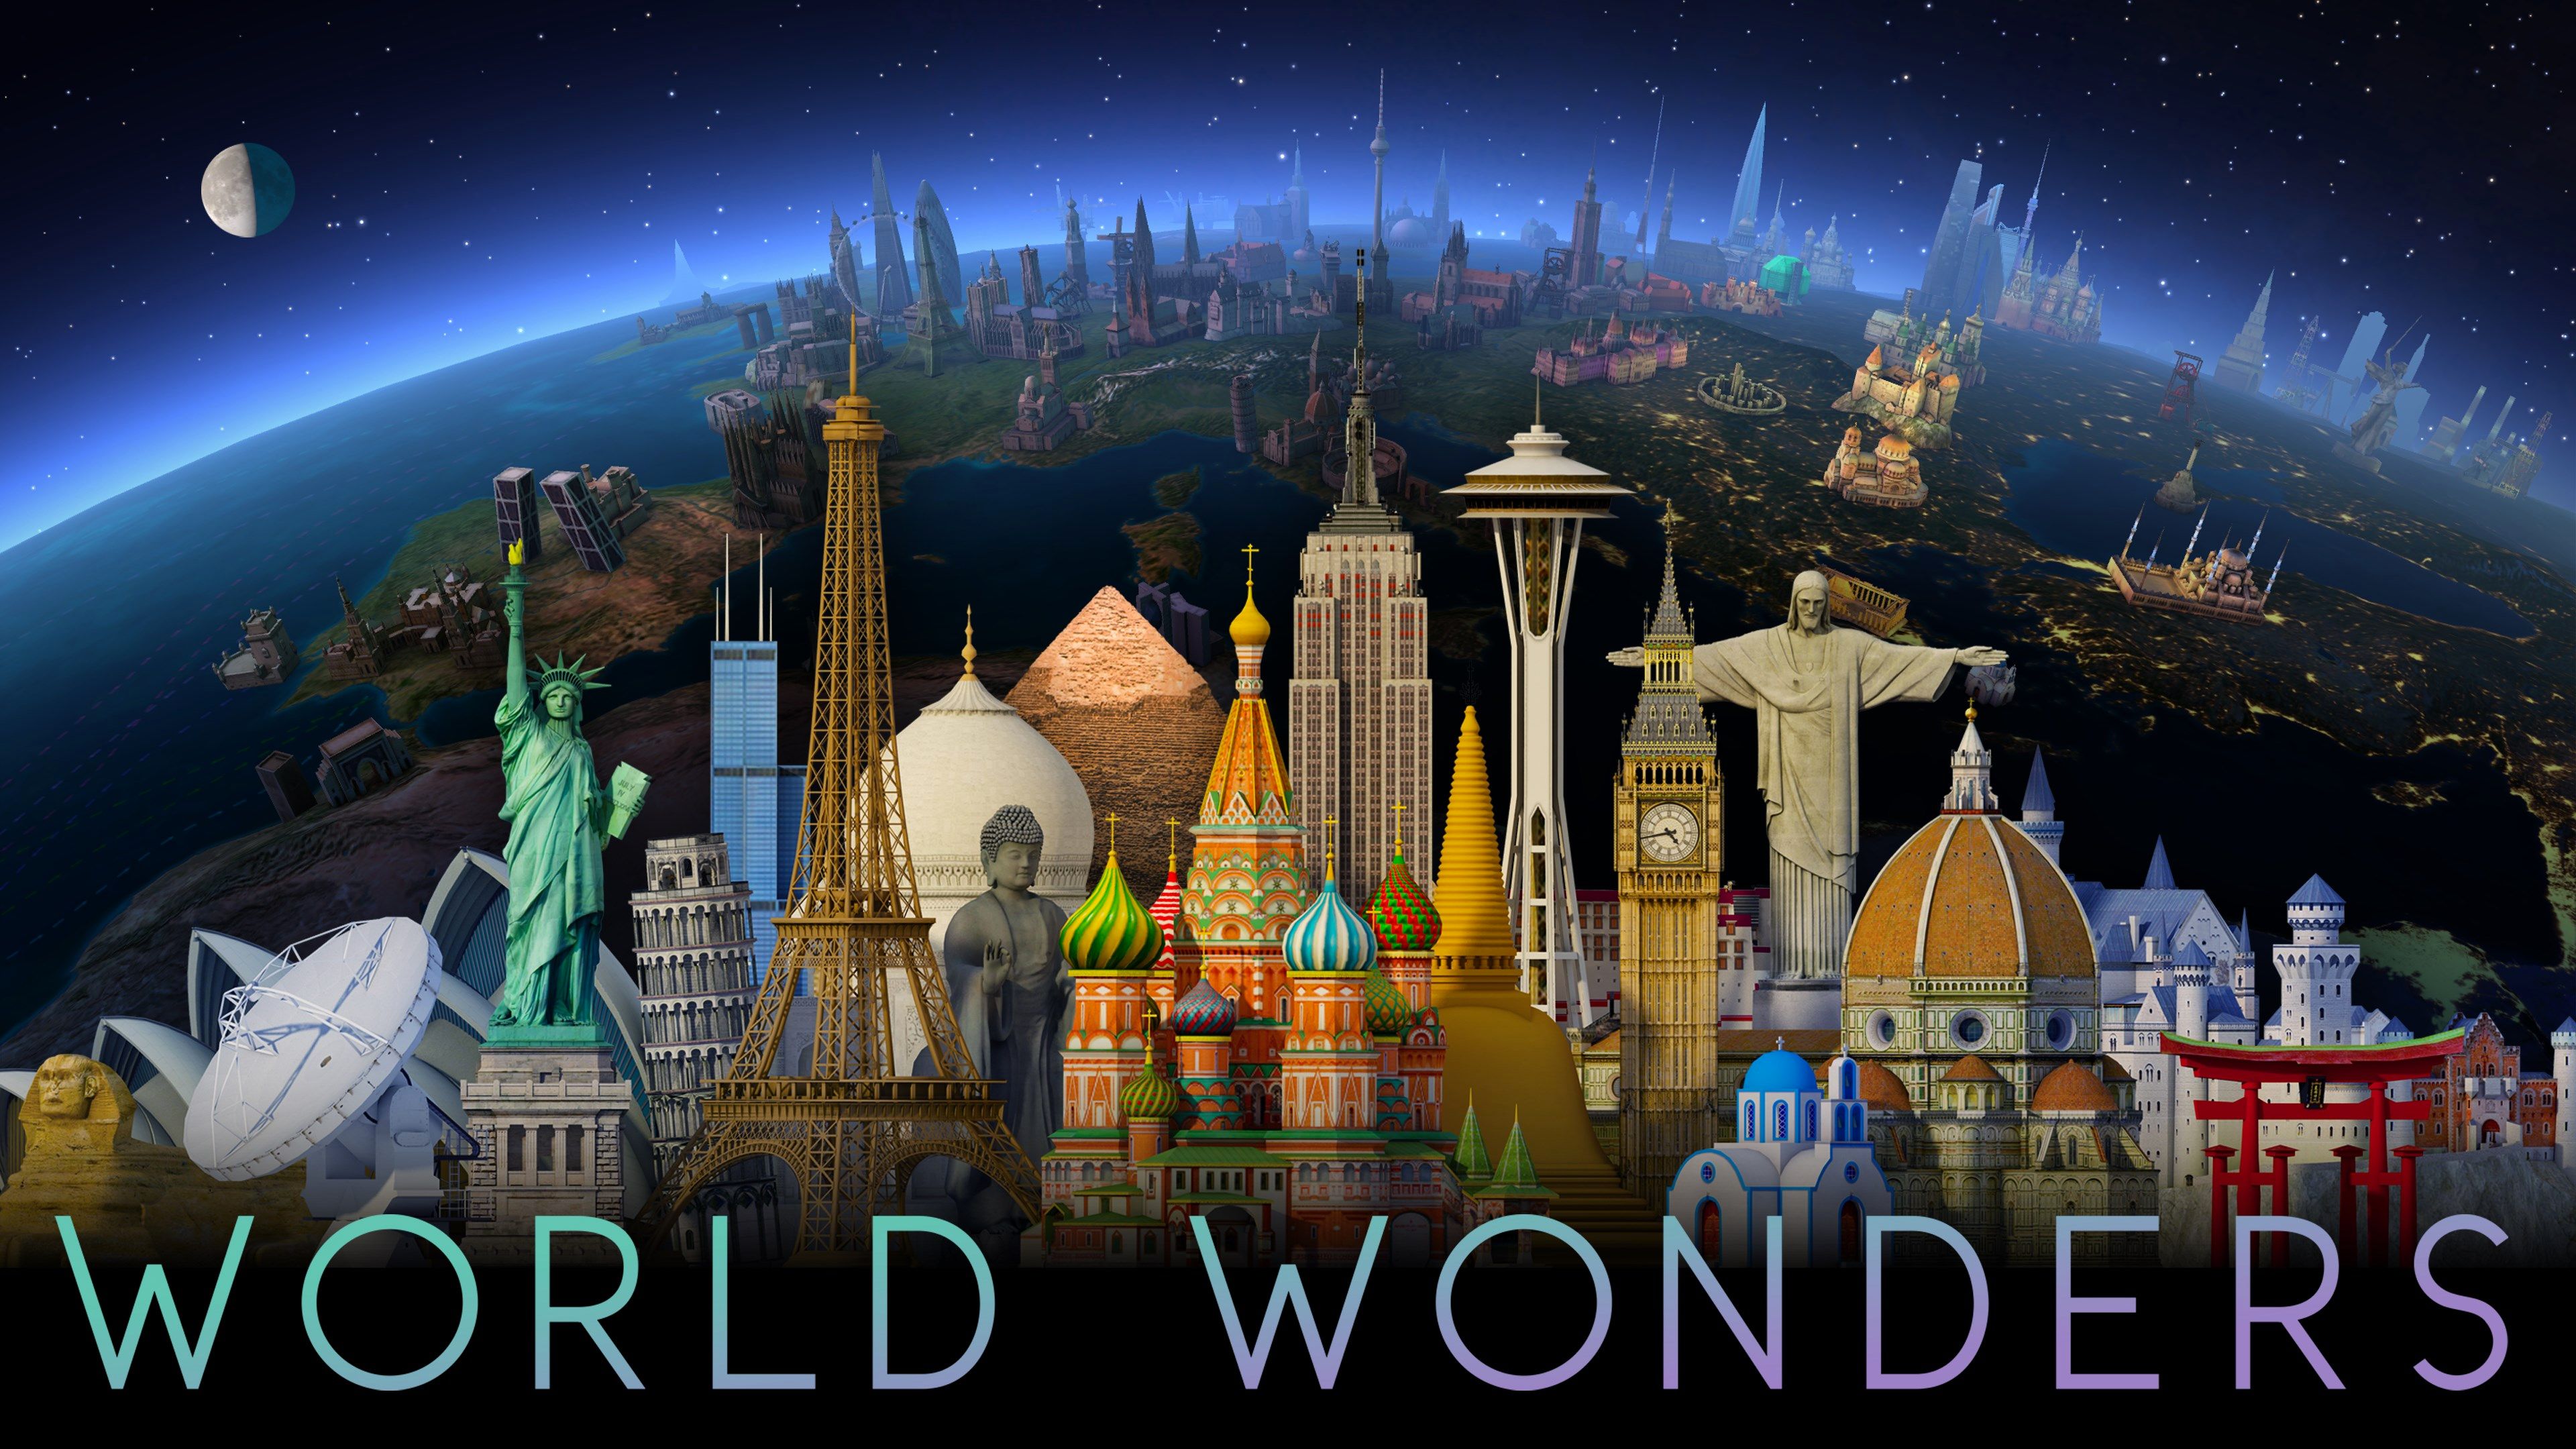 More than 500 wonders of the world